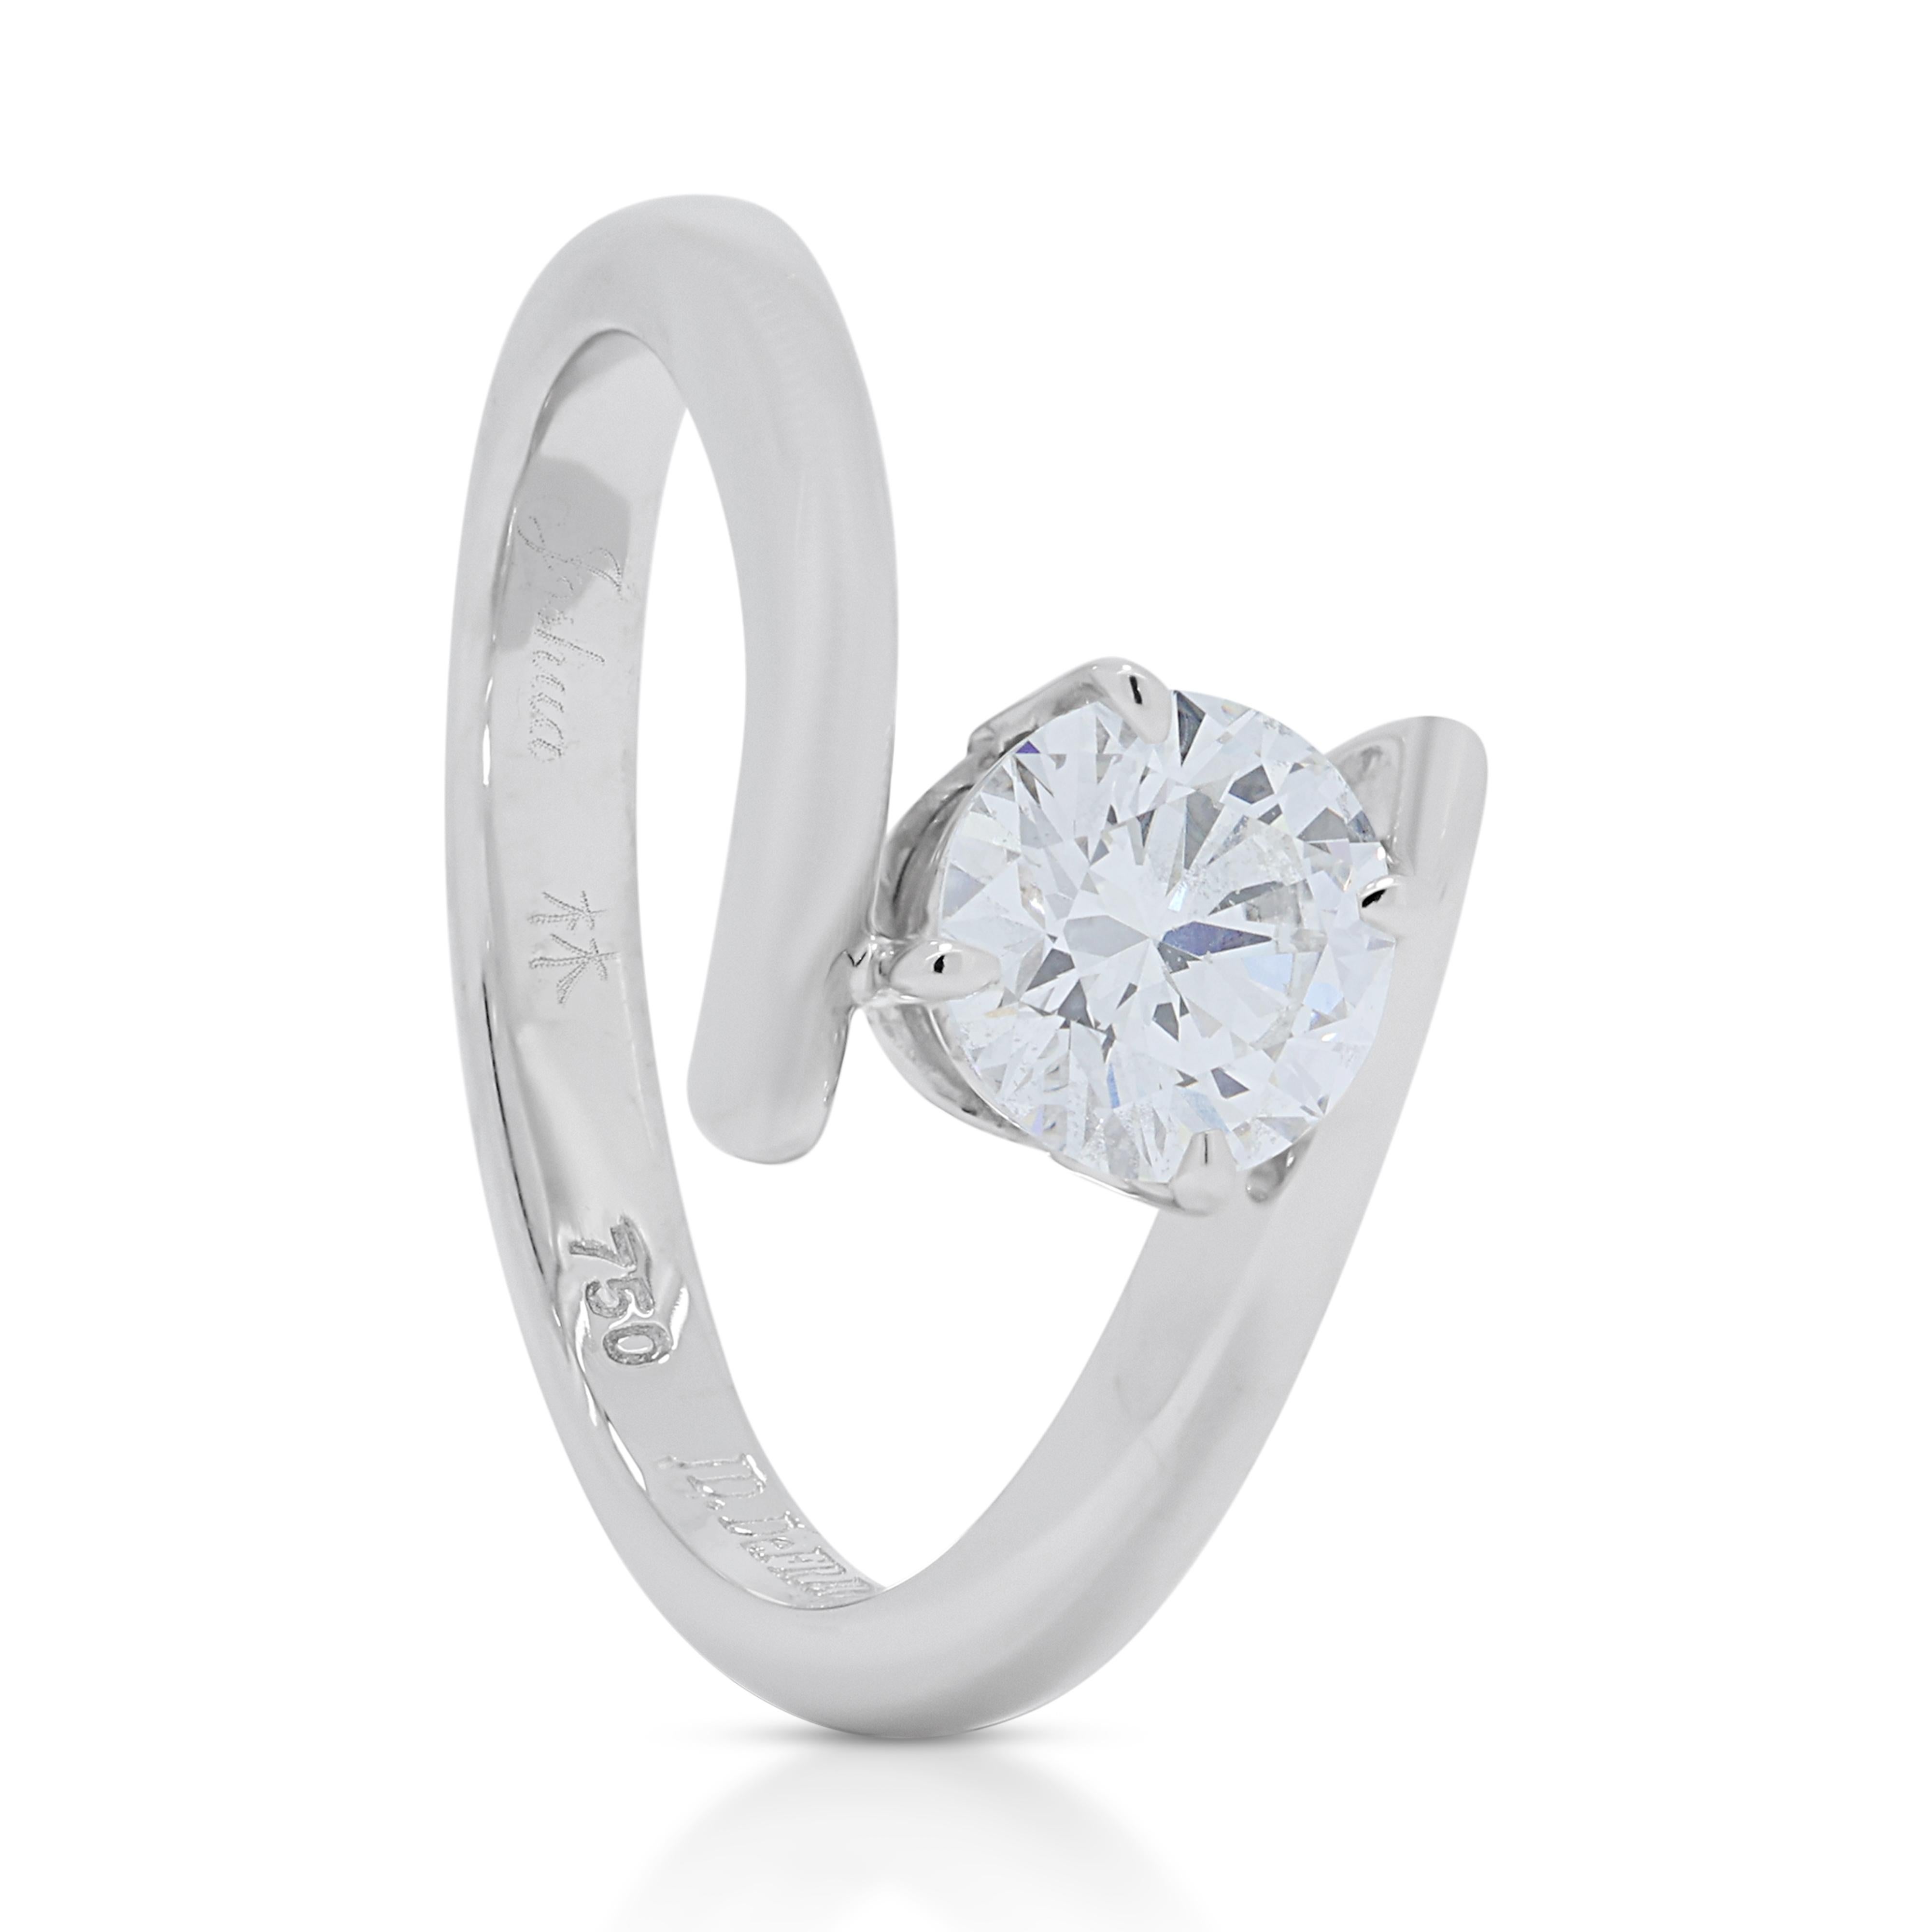 Stunning 0.72ct Diamond Solitaire Ring in 18K White Gold For Sale 2